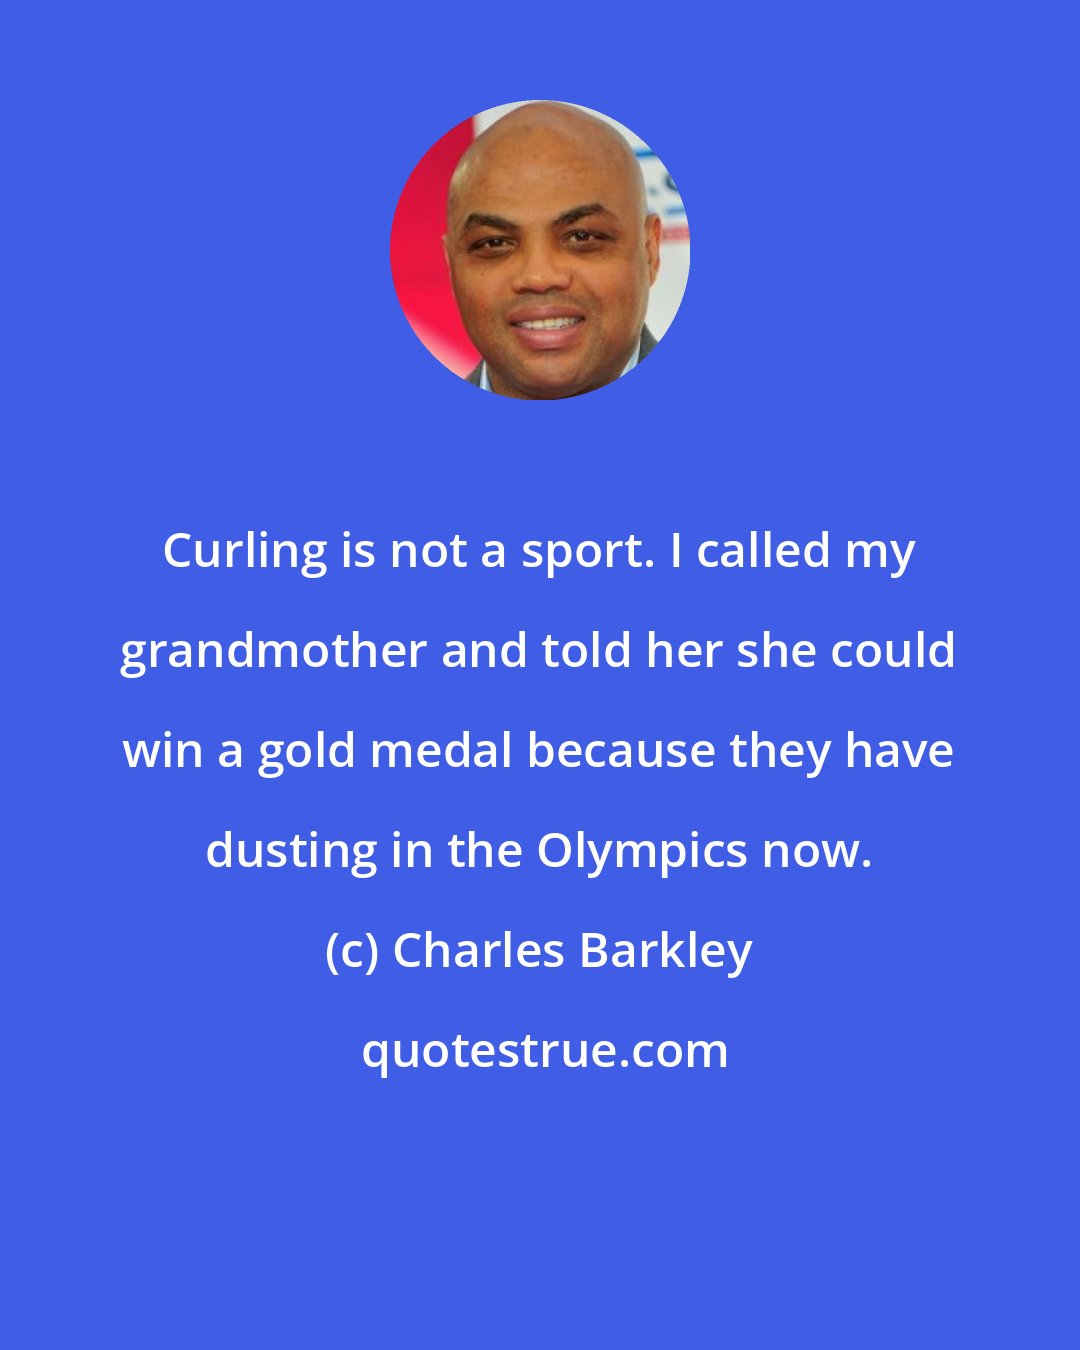 Charles Barkley: Curling is not a sport. I called my grandmother and told her she could win a gold medal because they have dusting in the Olympics now.